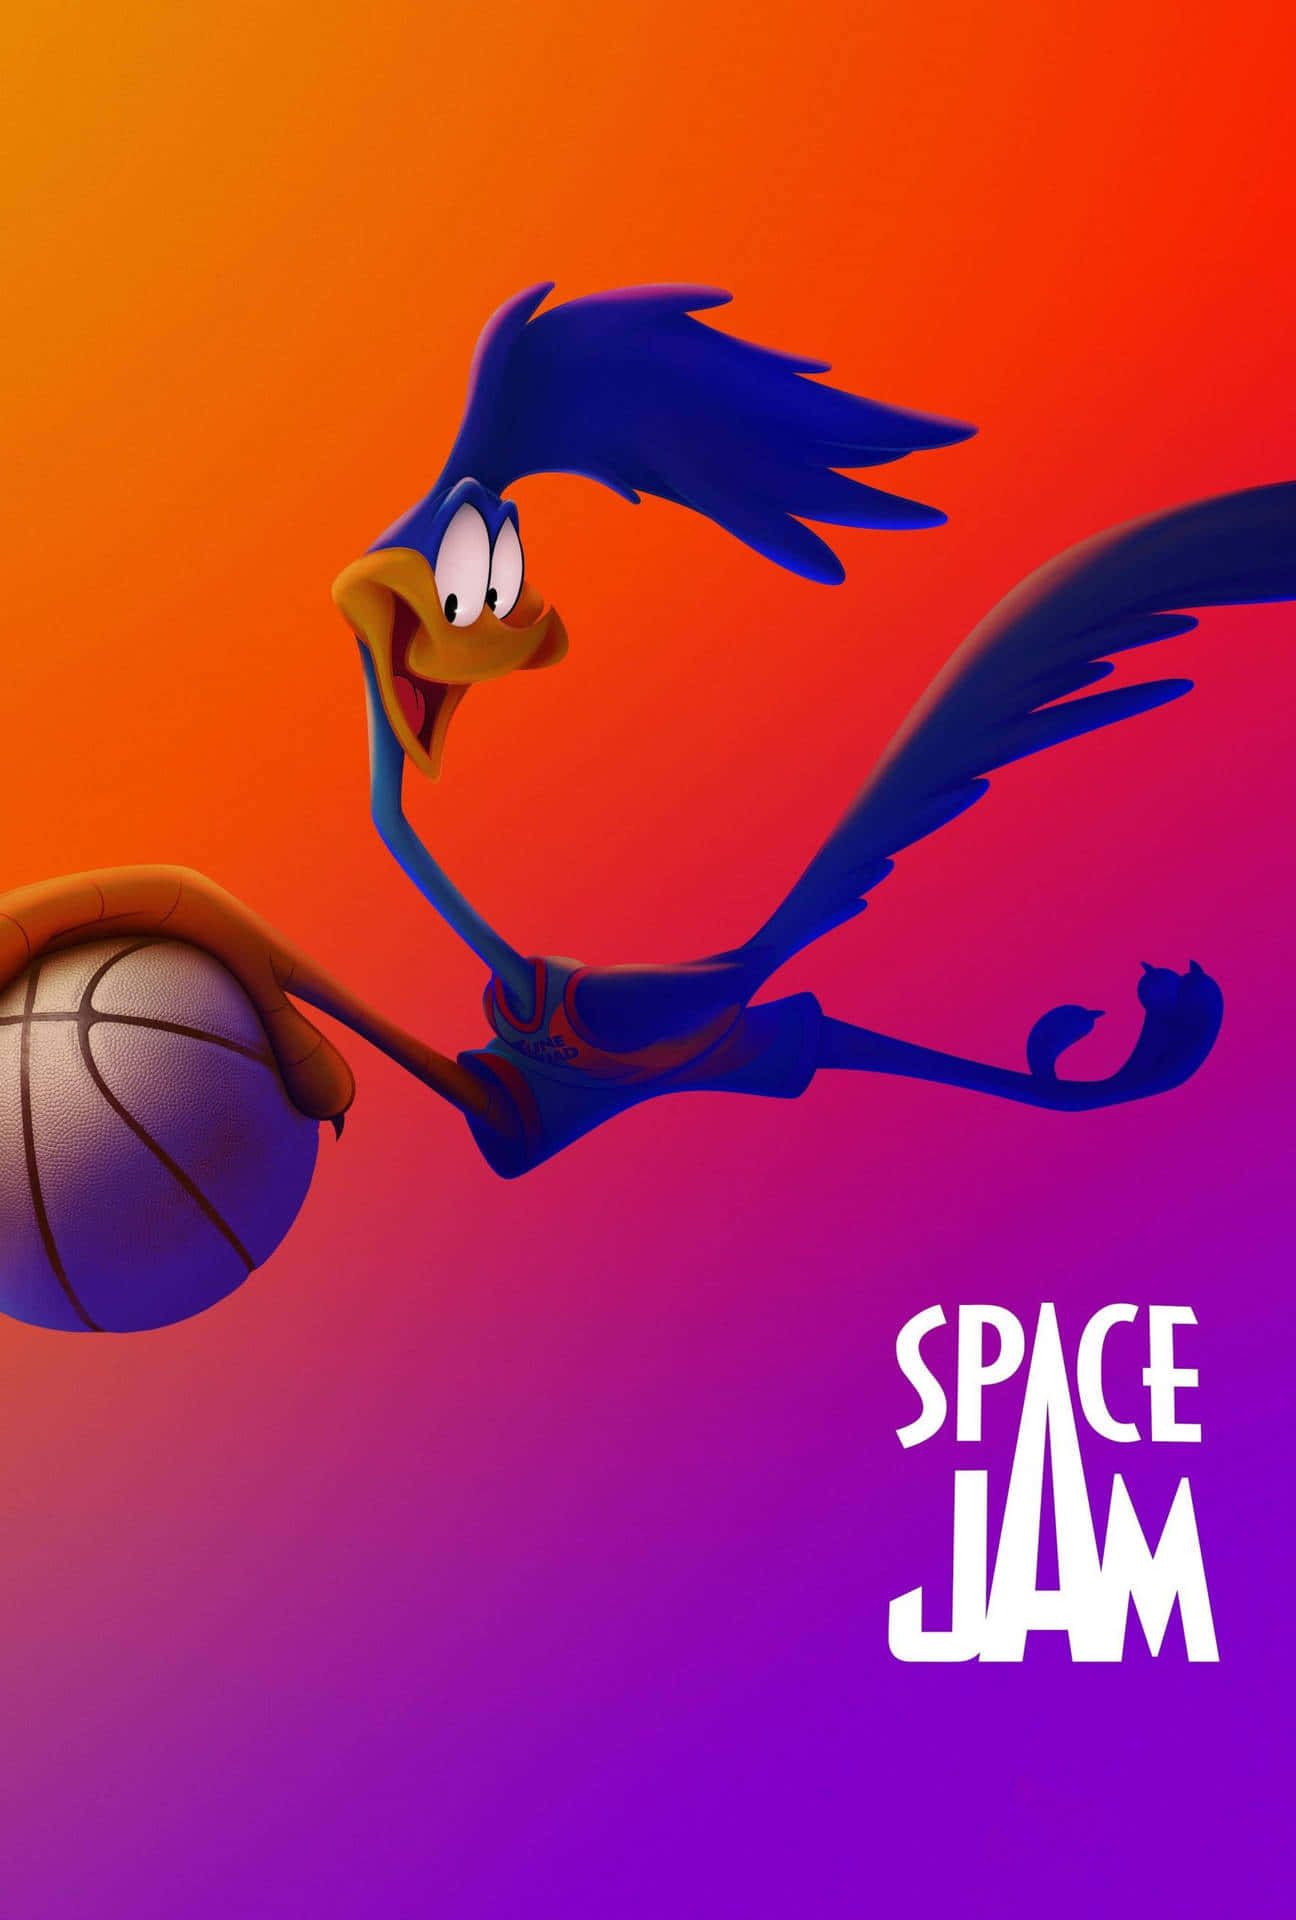 Cool Space Jam Road Runner With Ball Wallpaper